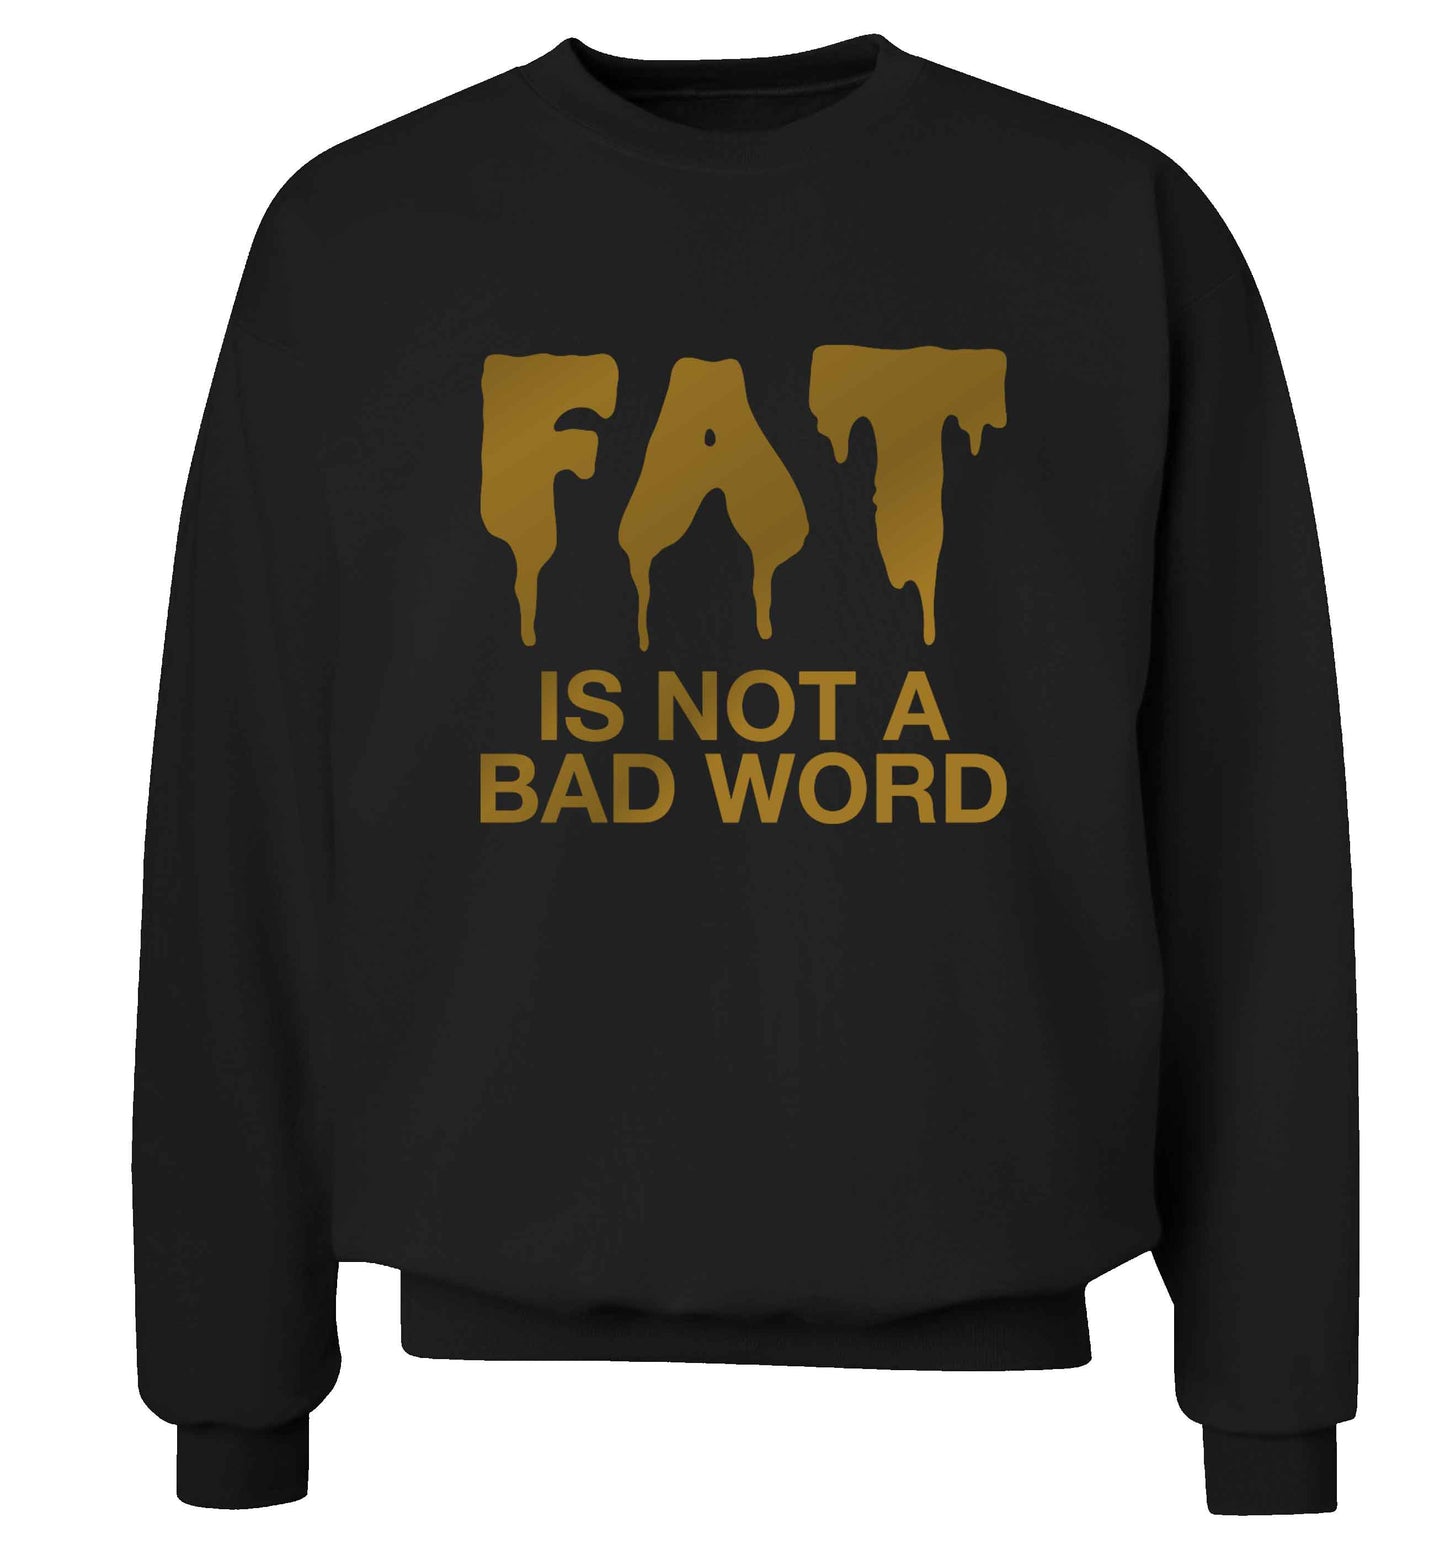 Fat is not a bad word adult's unisex black sweater 2XL